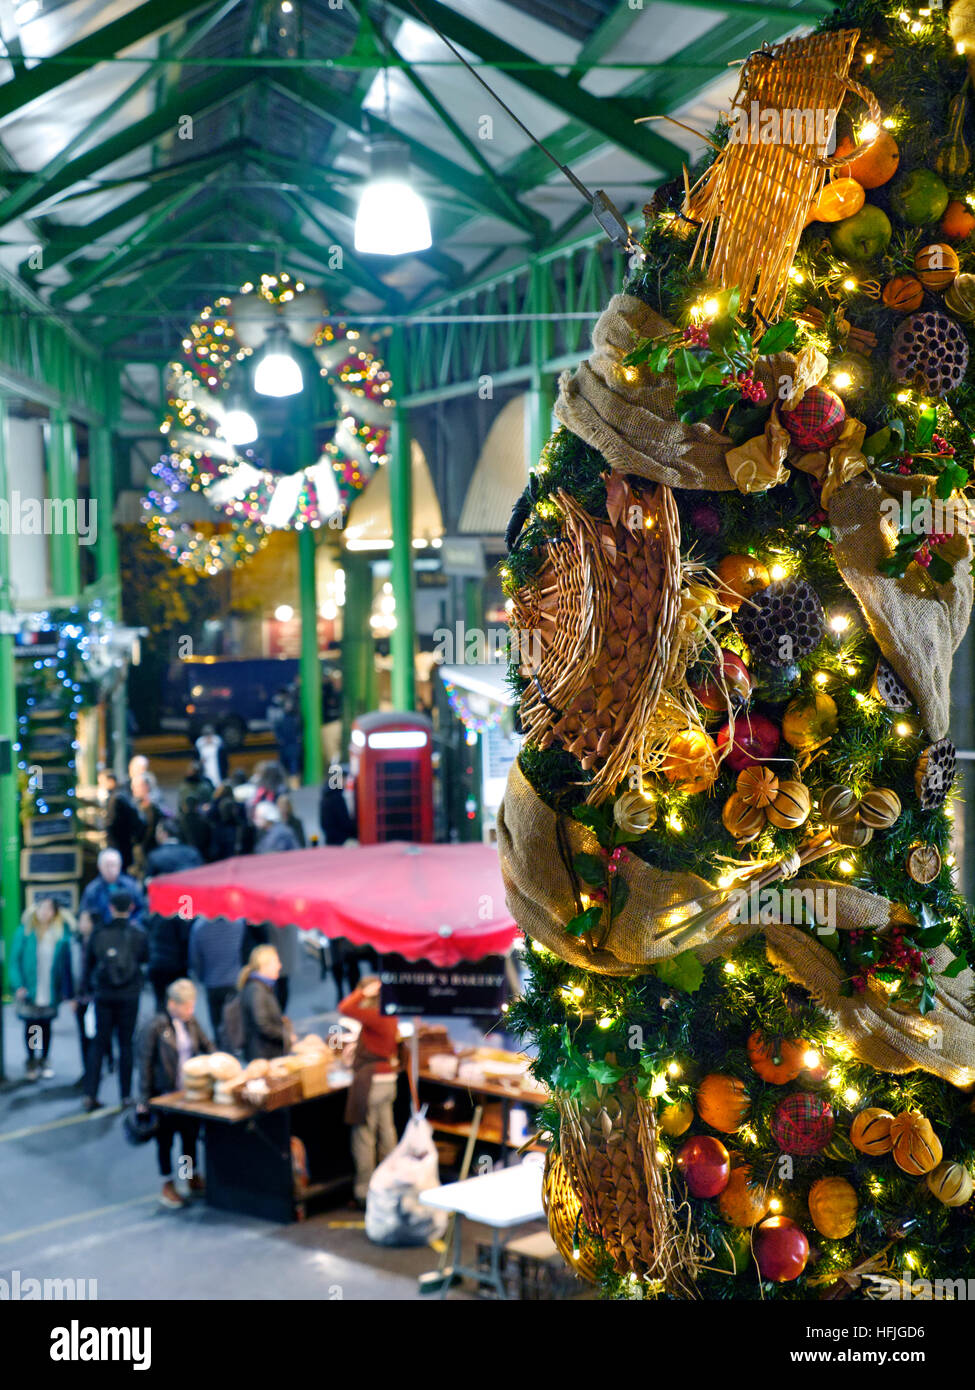 BOROUGH MARKET CHRISTMAS Elevated view of late night cheese market stalls and tasting samples, with produce themed Christmas wreath hanging in foreground Borough Market Southwark London SE1 Stock Photo